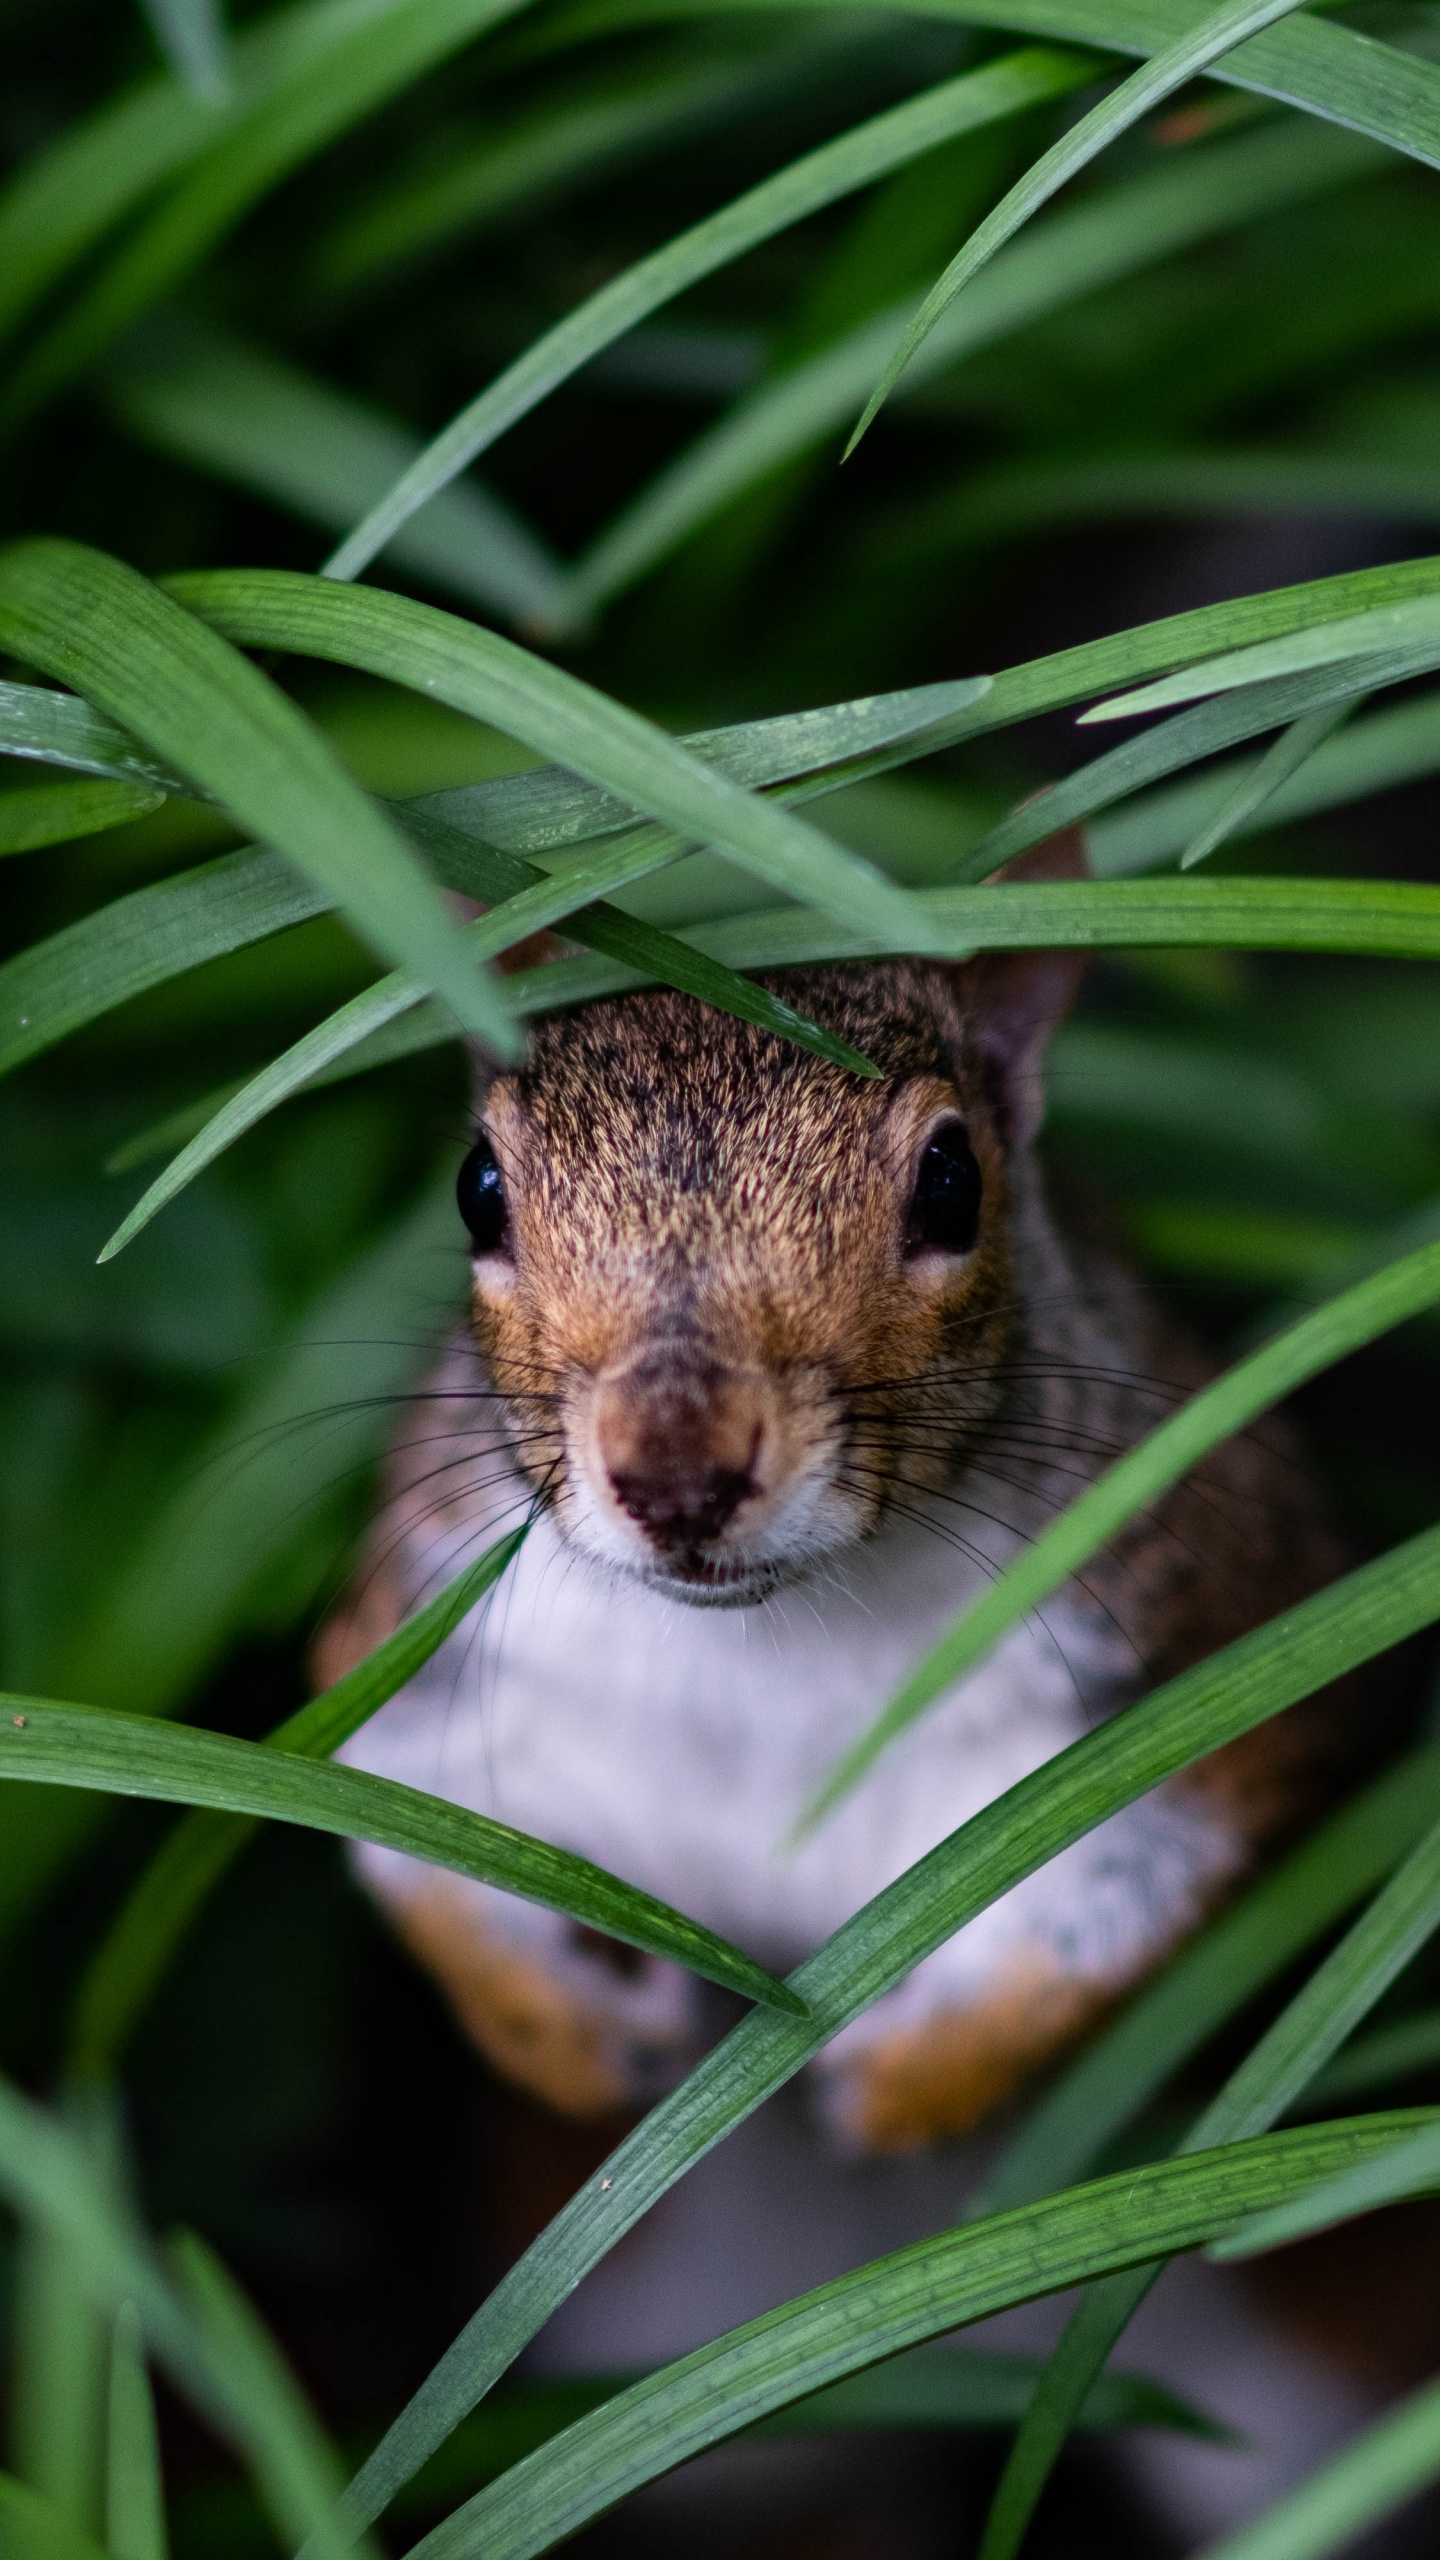 Brown and White Squirrel on Green Grass During Daytime. Wallpaper in 1440x2560 Resolution